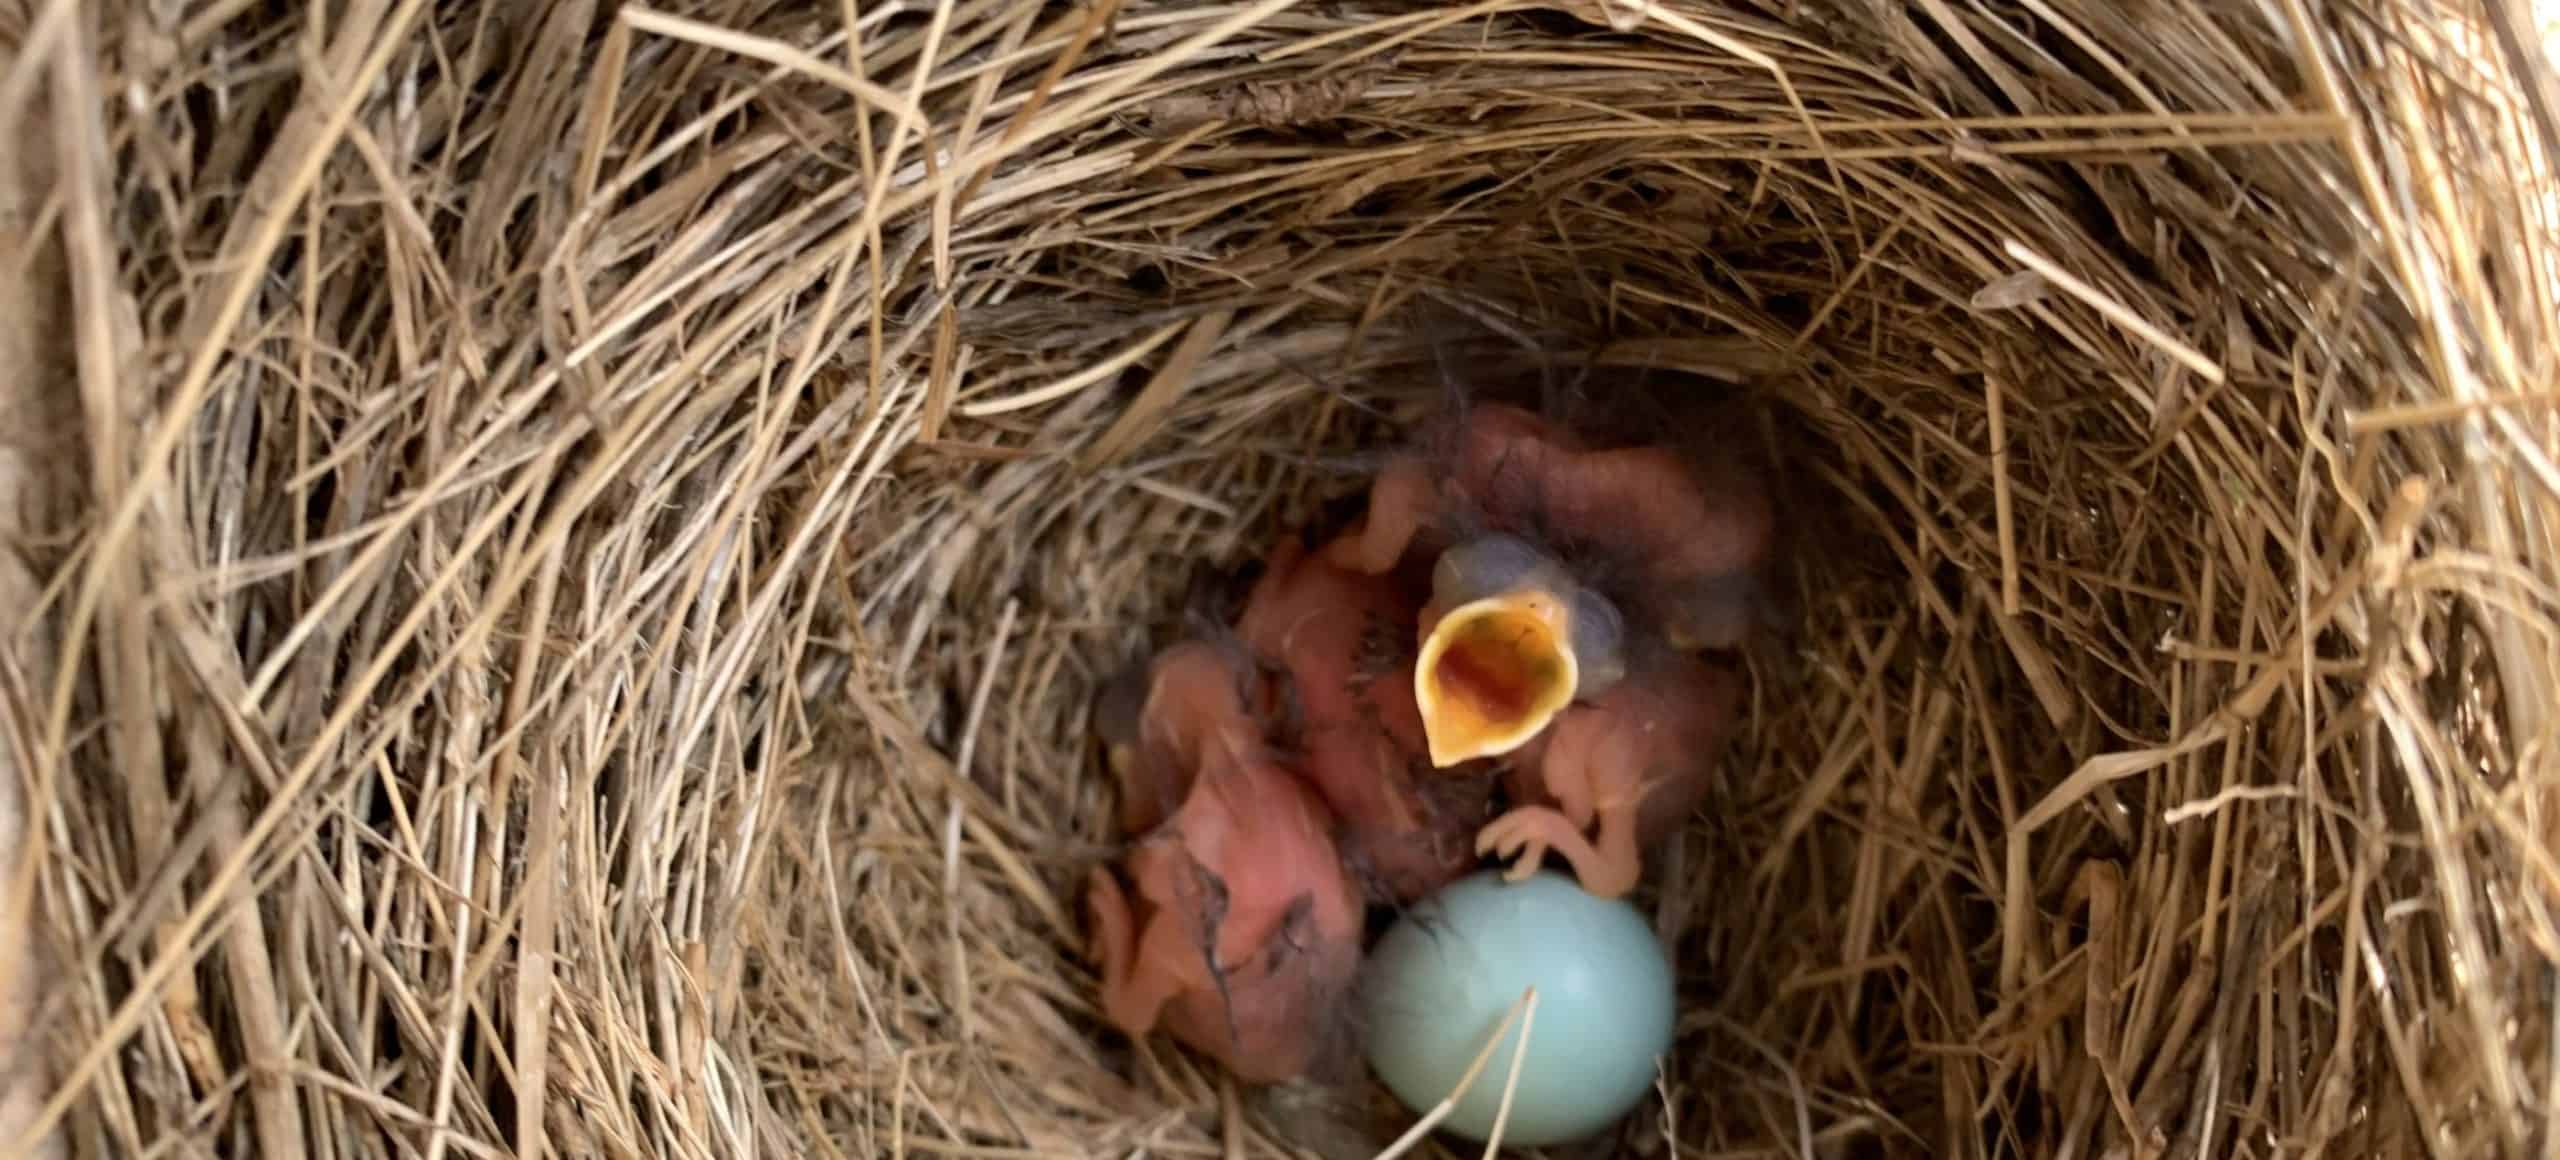 A blue bird nest seen from above. Small wingless birds are nestled in the next with one blue egg. One bird opens it's yellow mouth towards the camera.